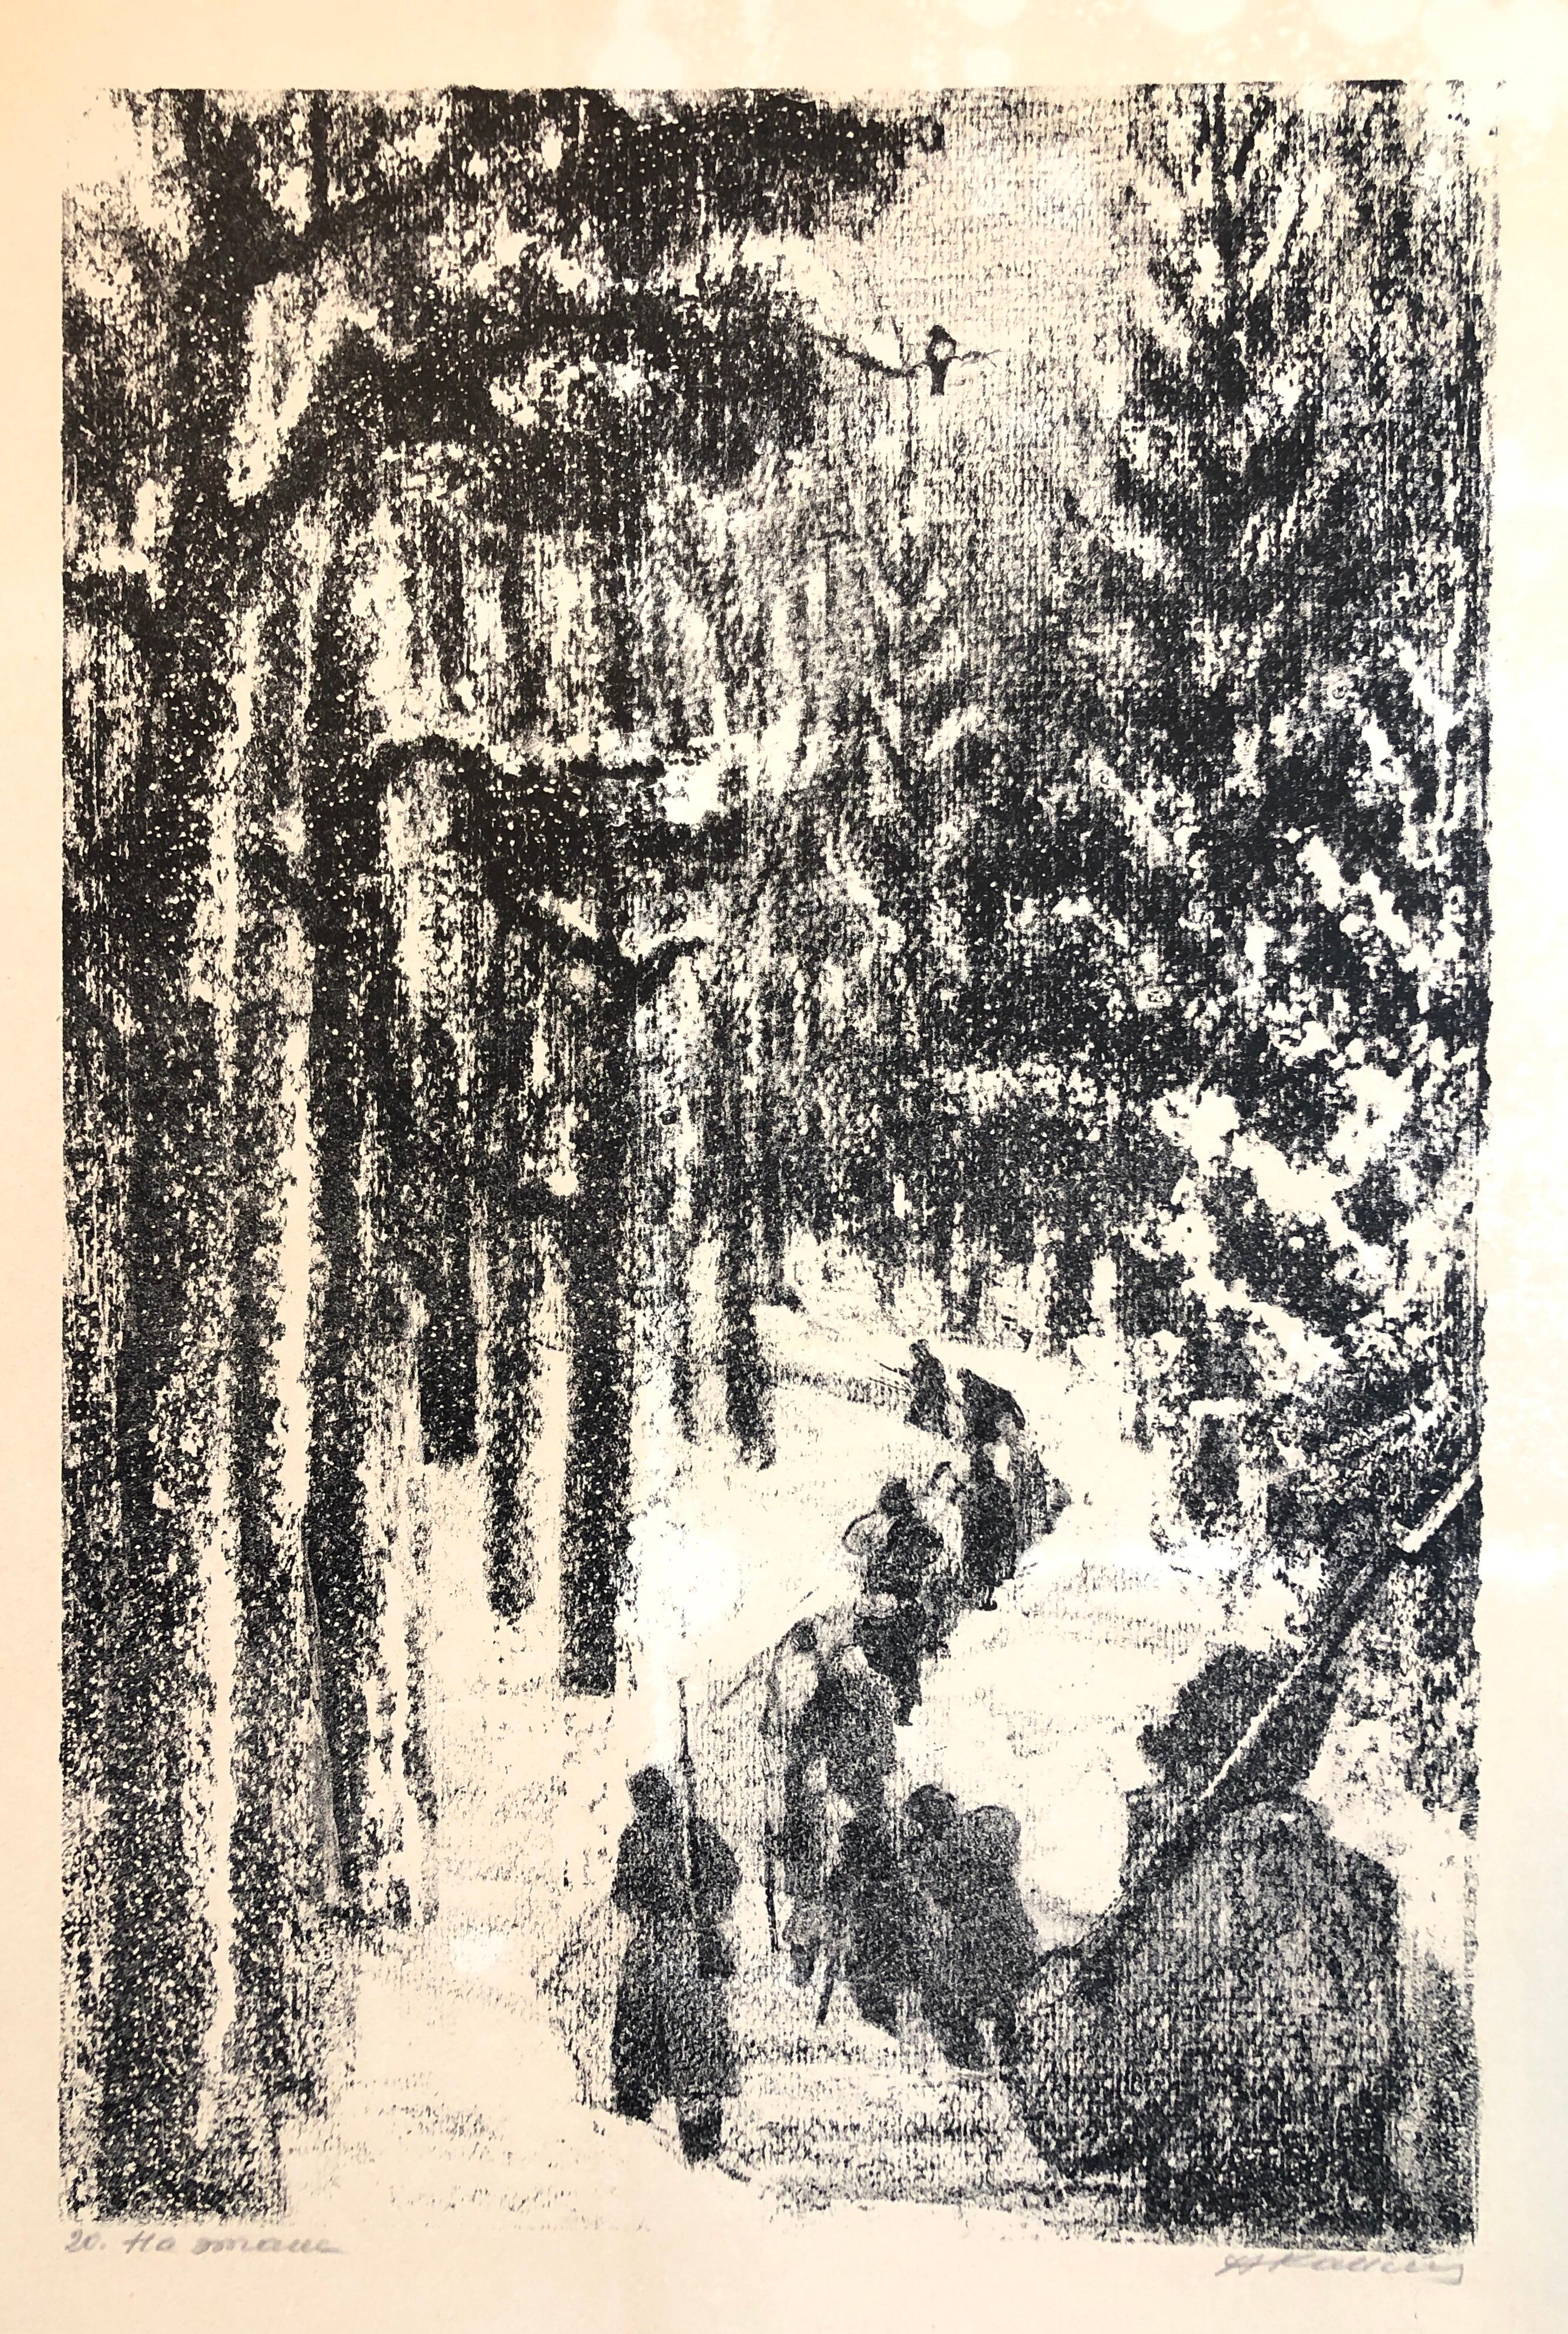 Vintage Russian Ukrainian Soldiers in Forest Scene Judaica Lithograph Jewish Art - Print by Anatoli Lvovich Kaplan